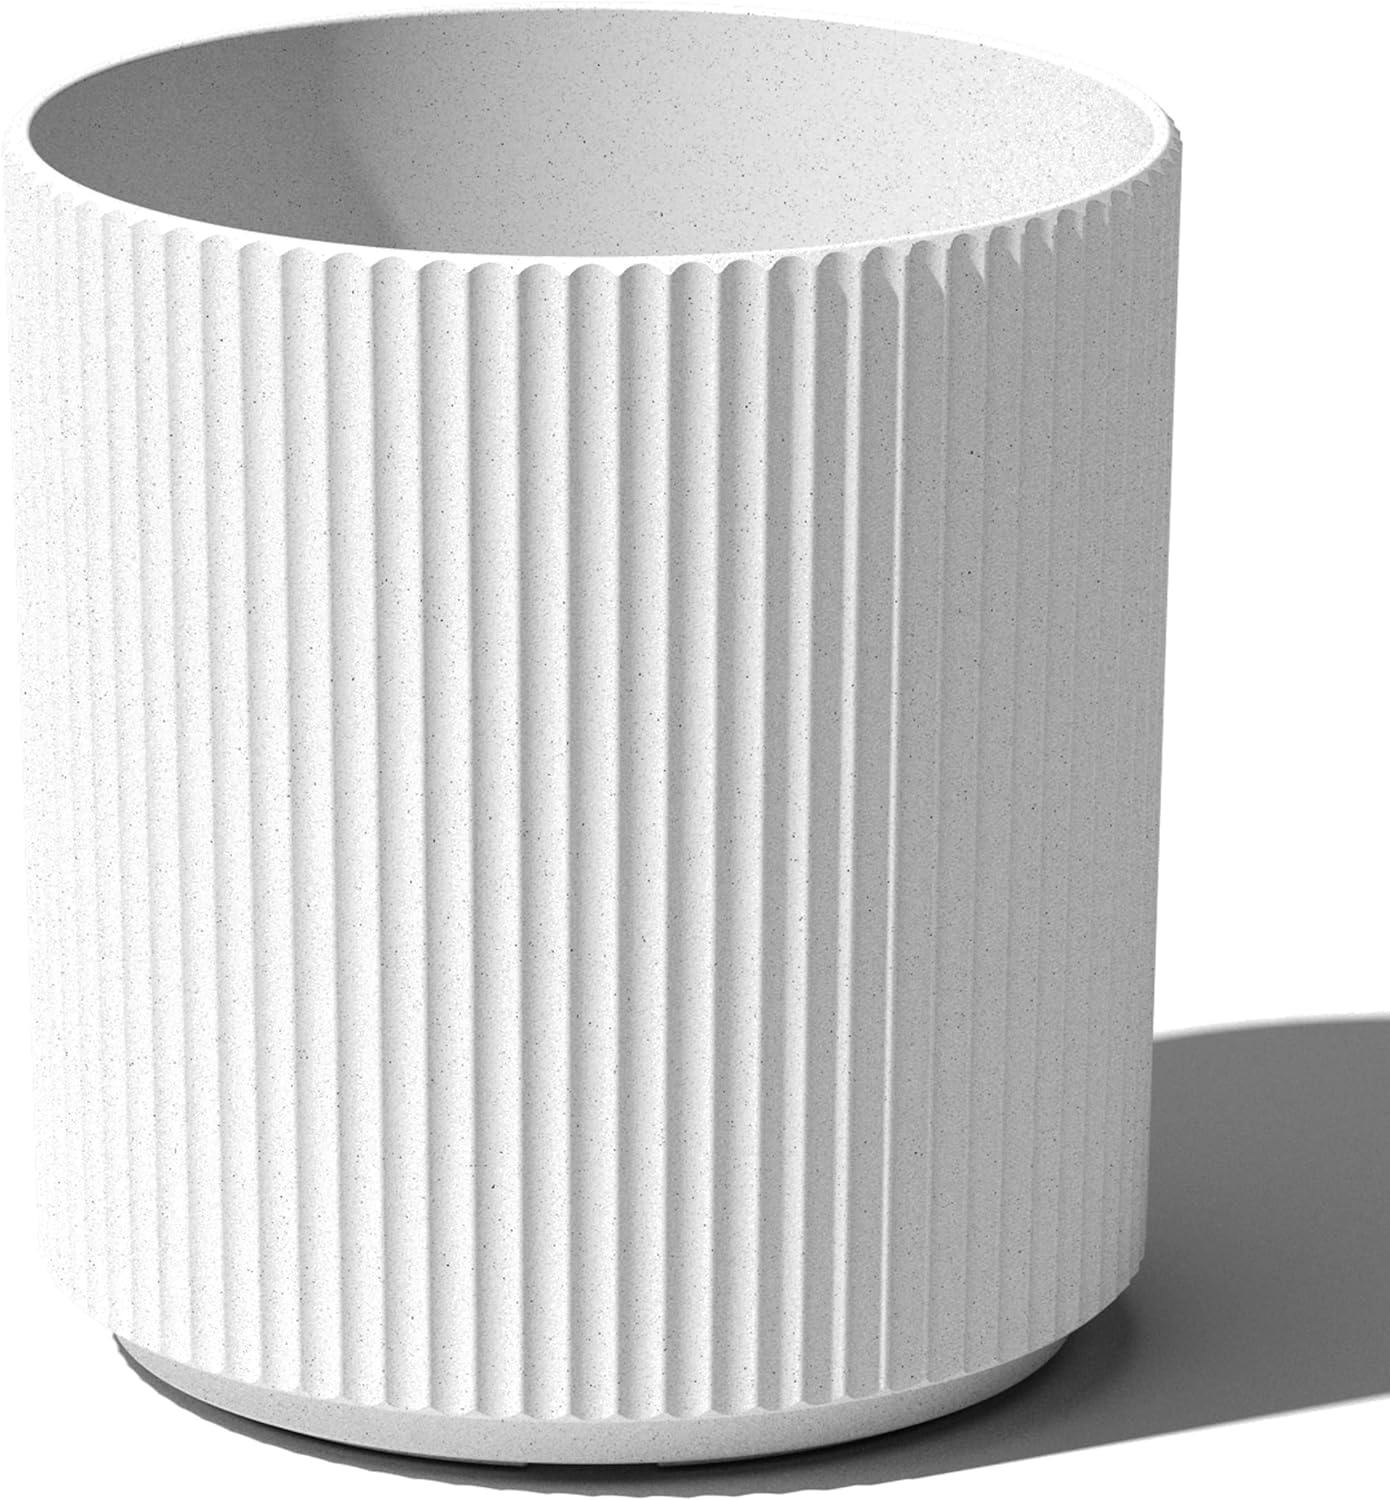 Roman-Inspired Demi 20" White Fluted Planter for Indoor/Outdoor Use